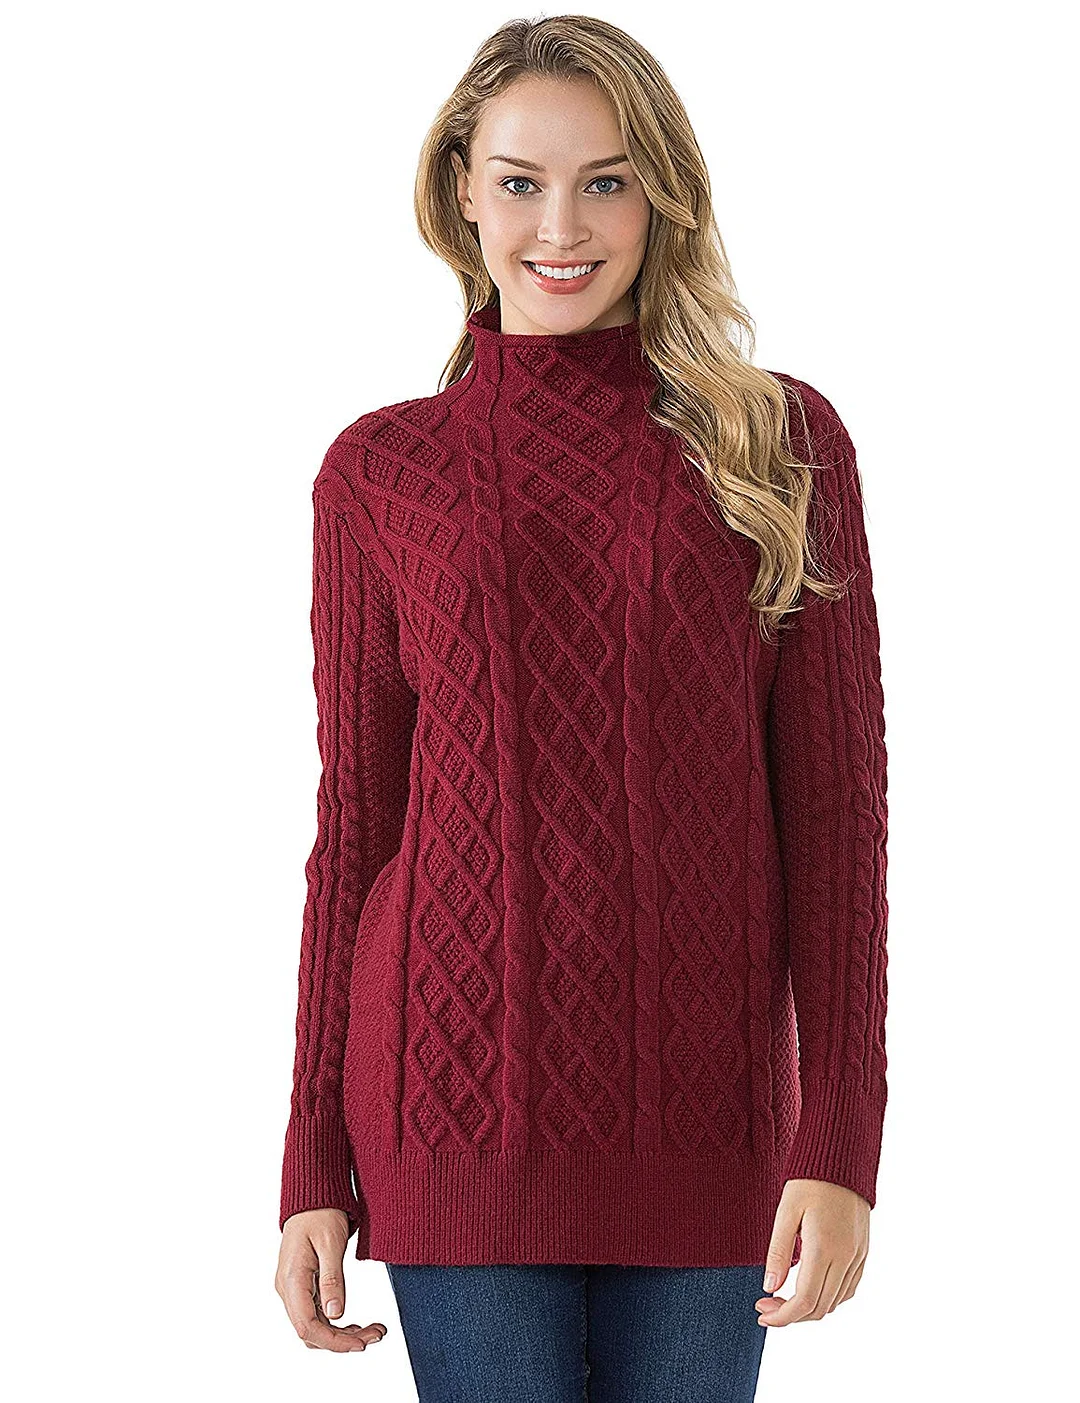 Women's Tunic Sweater Cable Knit Mock Neck Pullover Long Sweater Tops